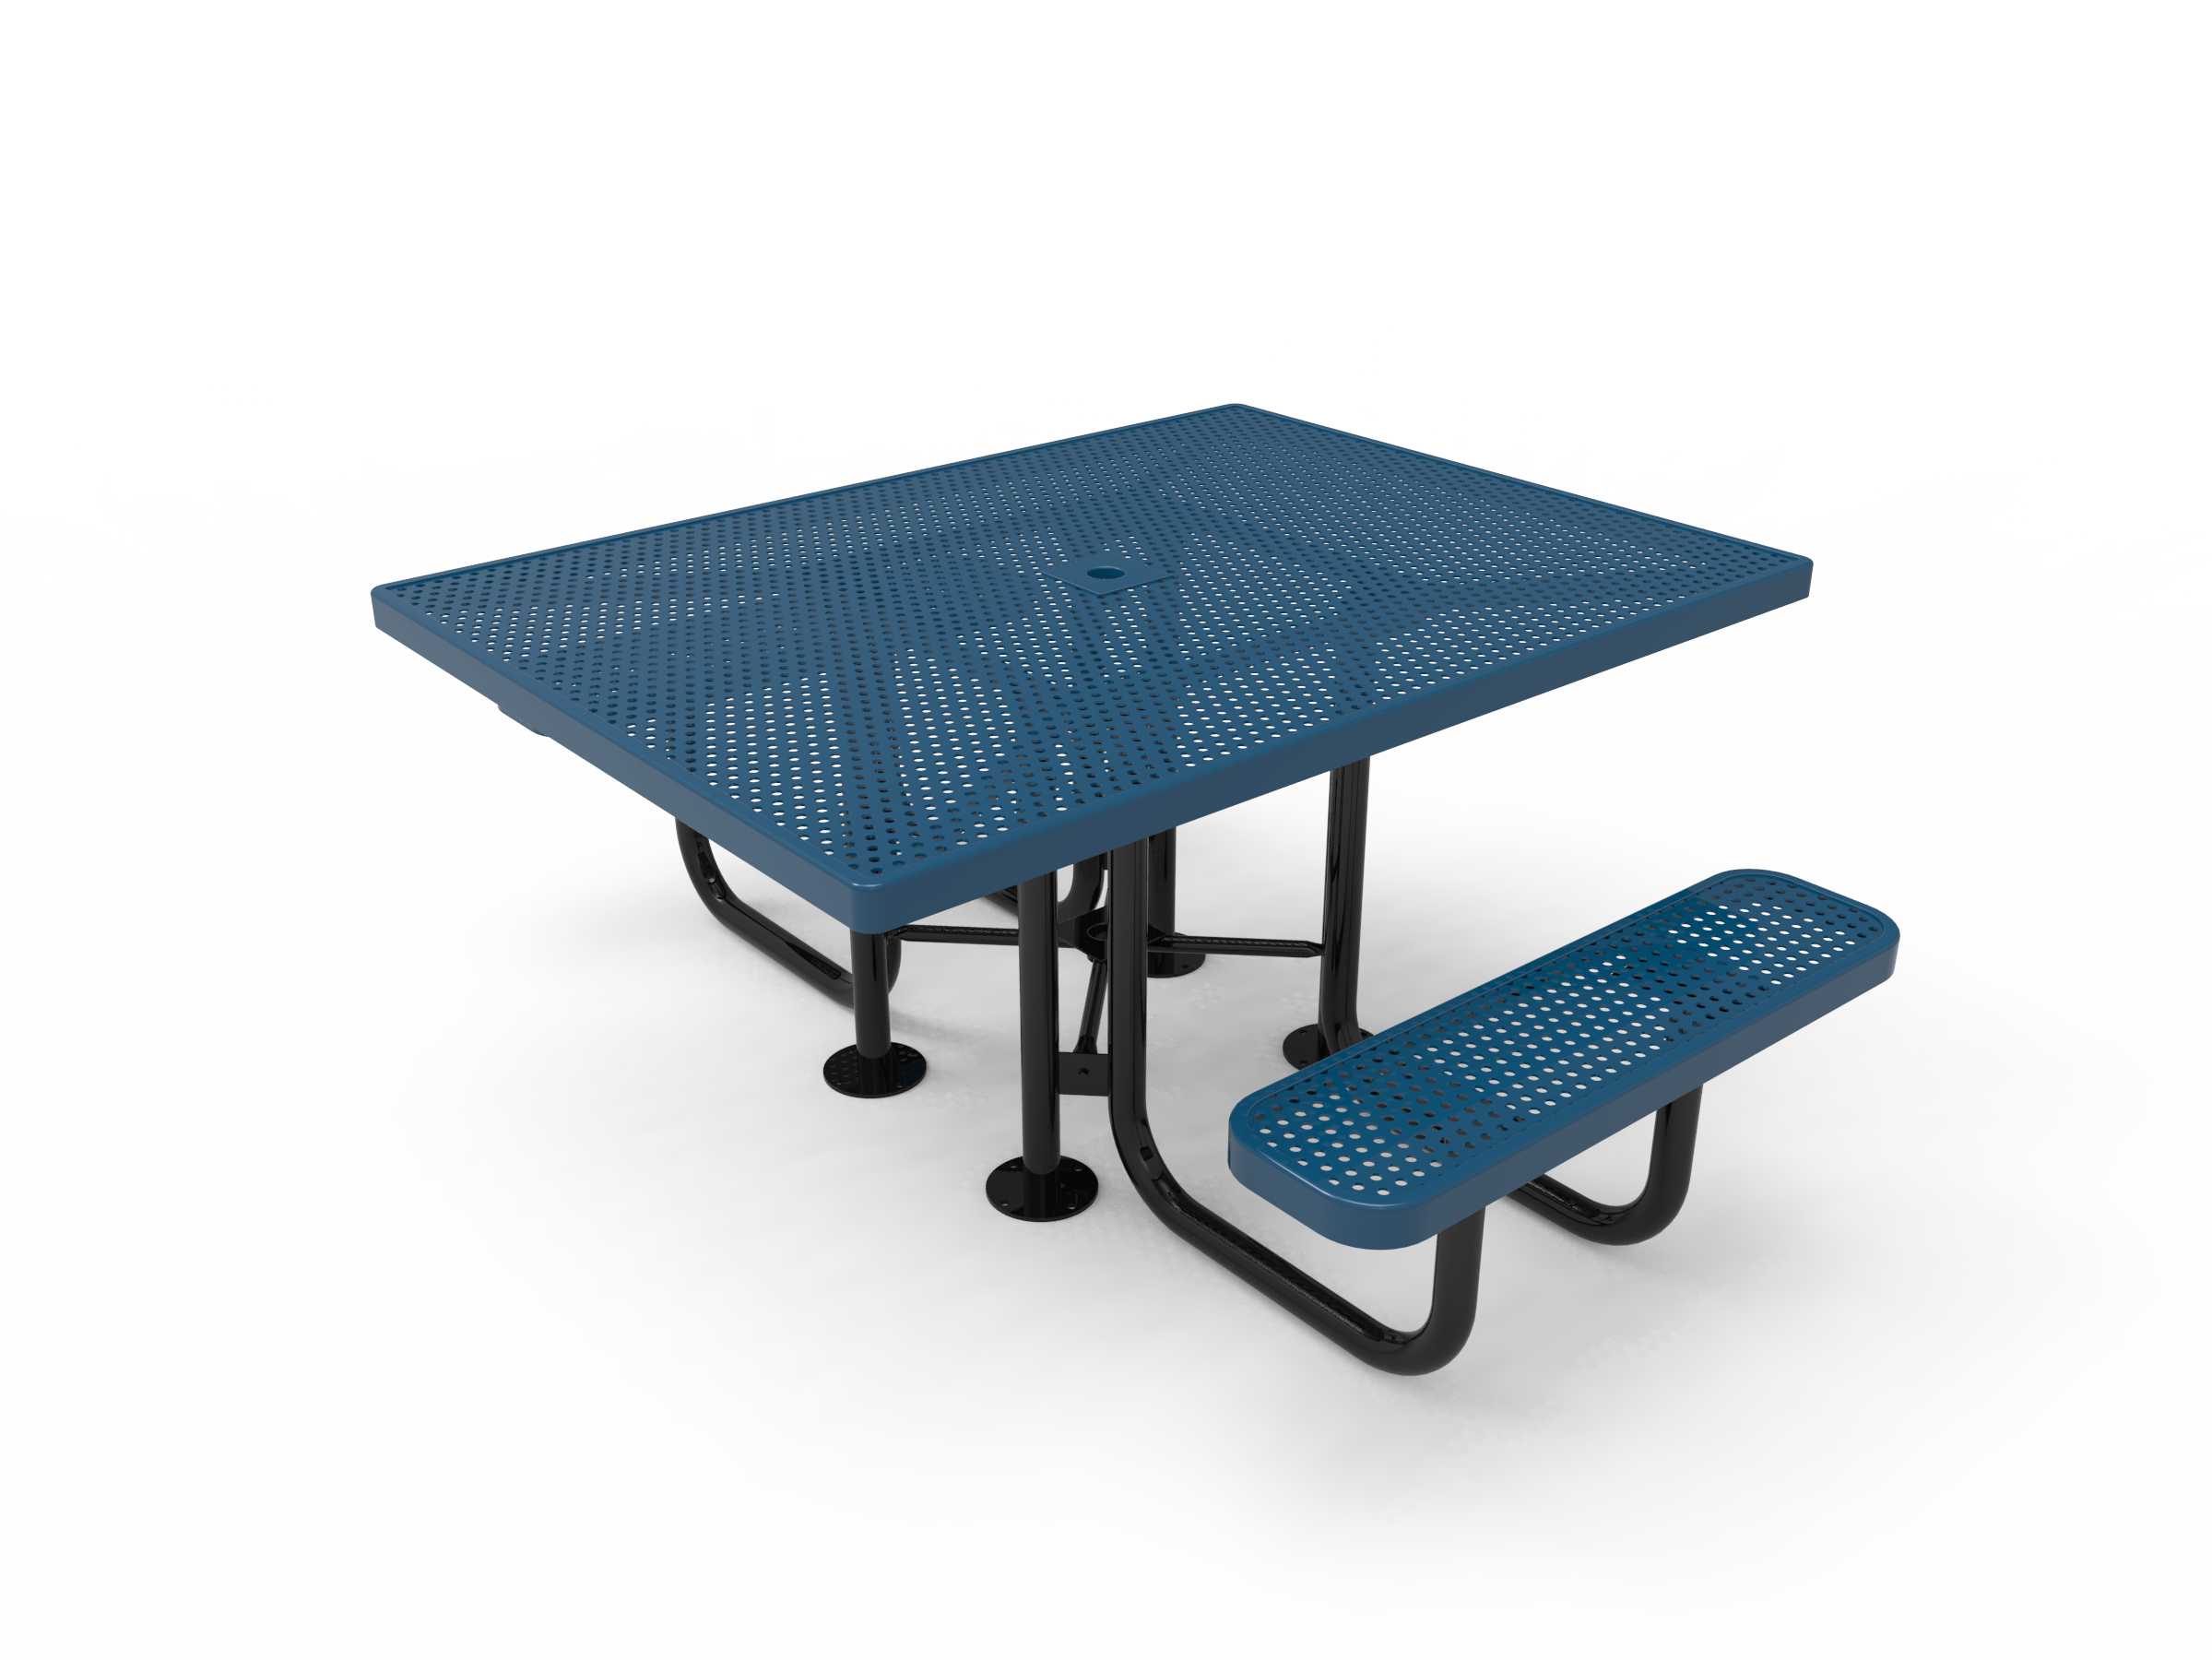 Rivendale Square Portable Table - ADA Accessible, Frame with Powder Coat Finish, Top and Seats with Standard Thermoplastic Coating